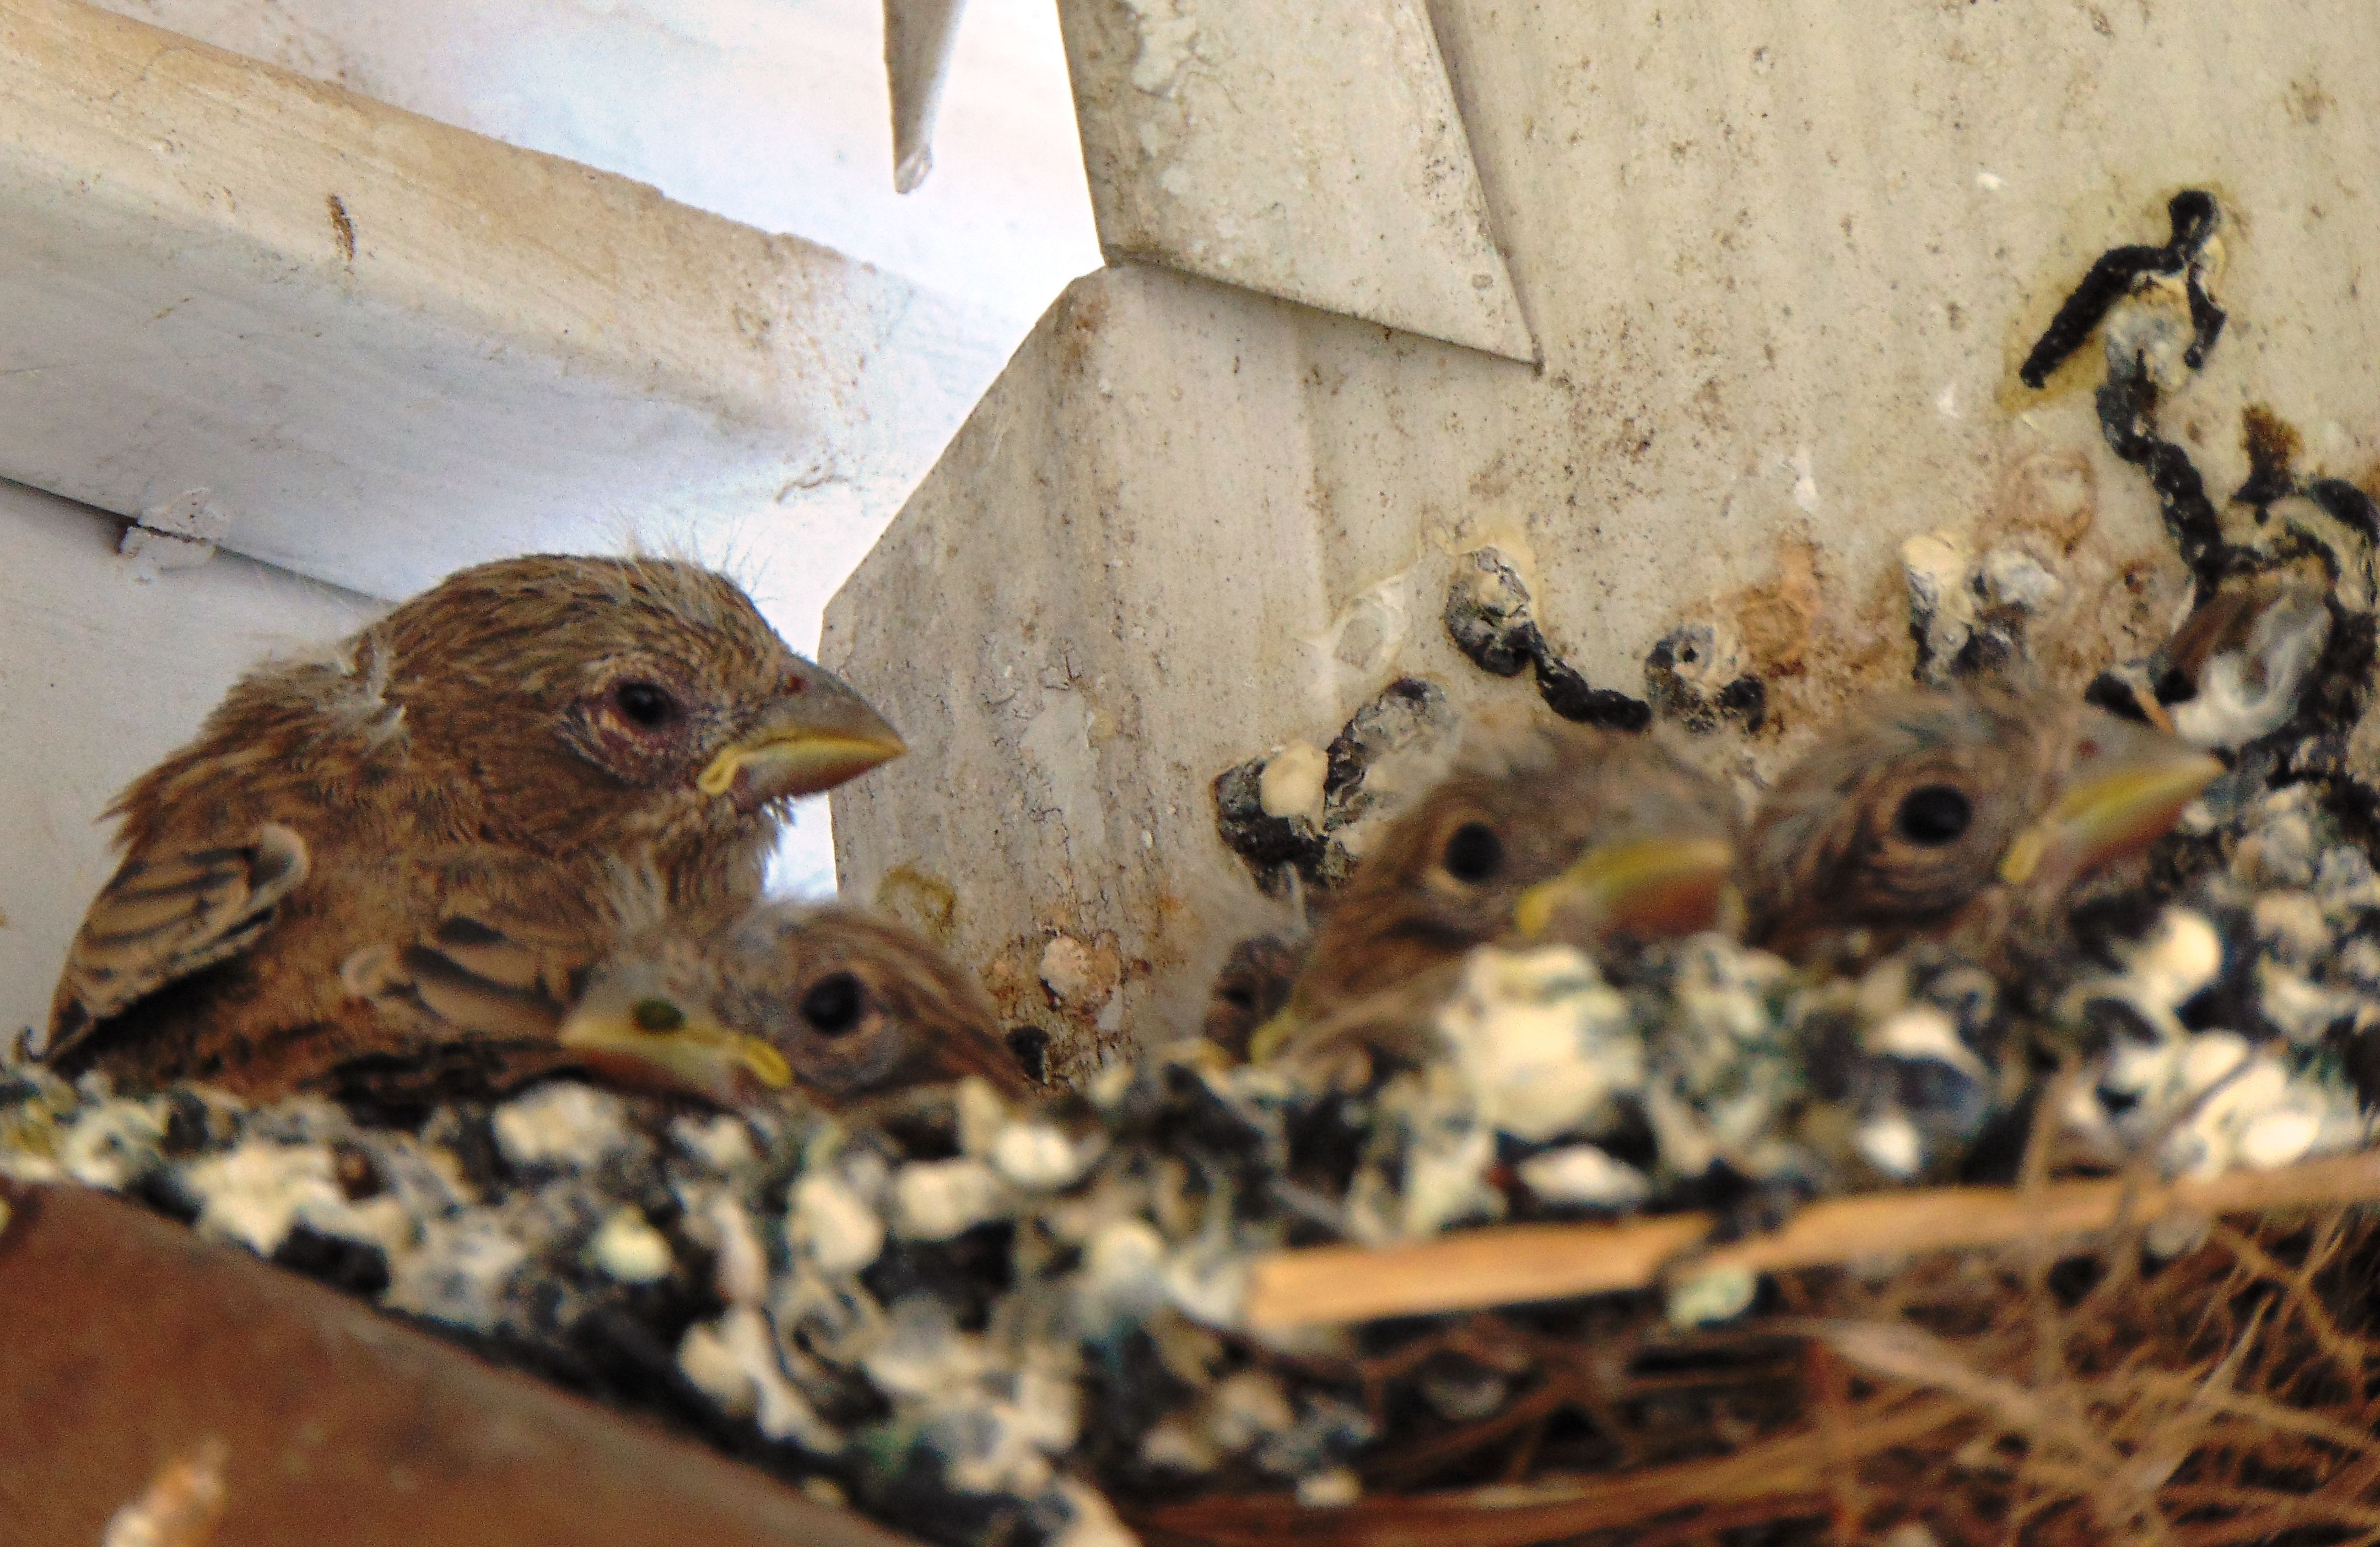 baby house finch care